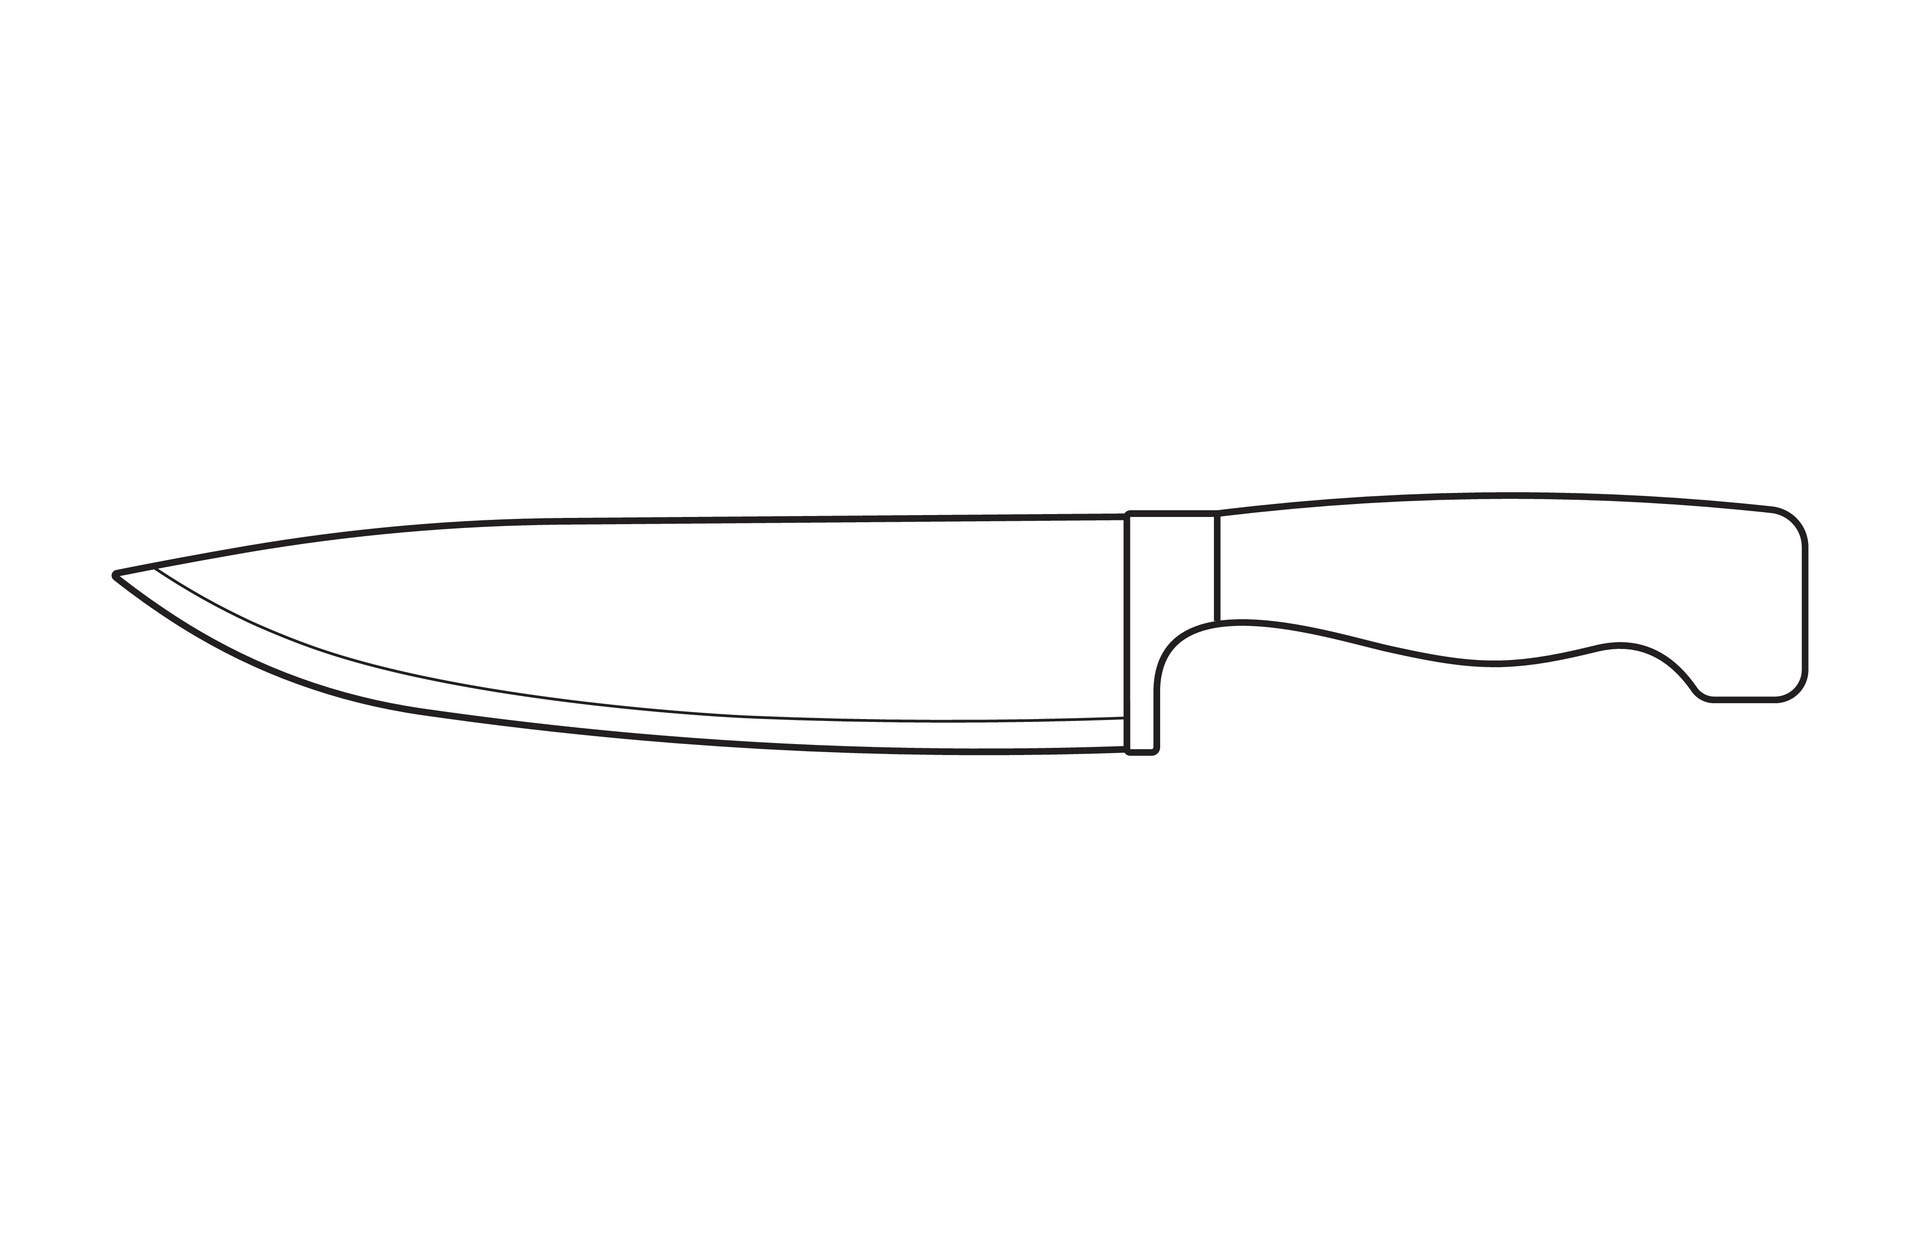 https://static.vecteezy.com/system/resources/previews/033/106/910/original/hand-drawn-kids-drawing-cartoon-illustration-chef-knife-isolated-in-doodle-style-vector.jpg